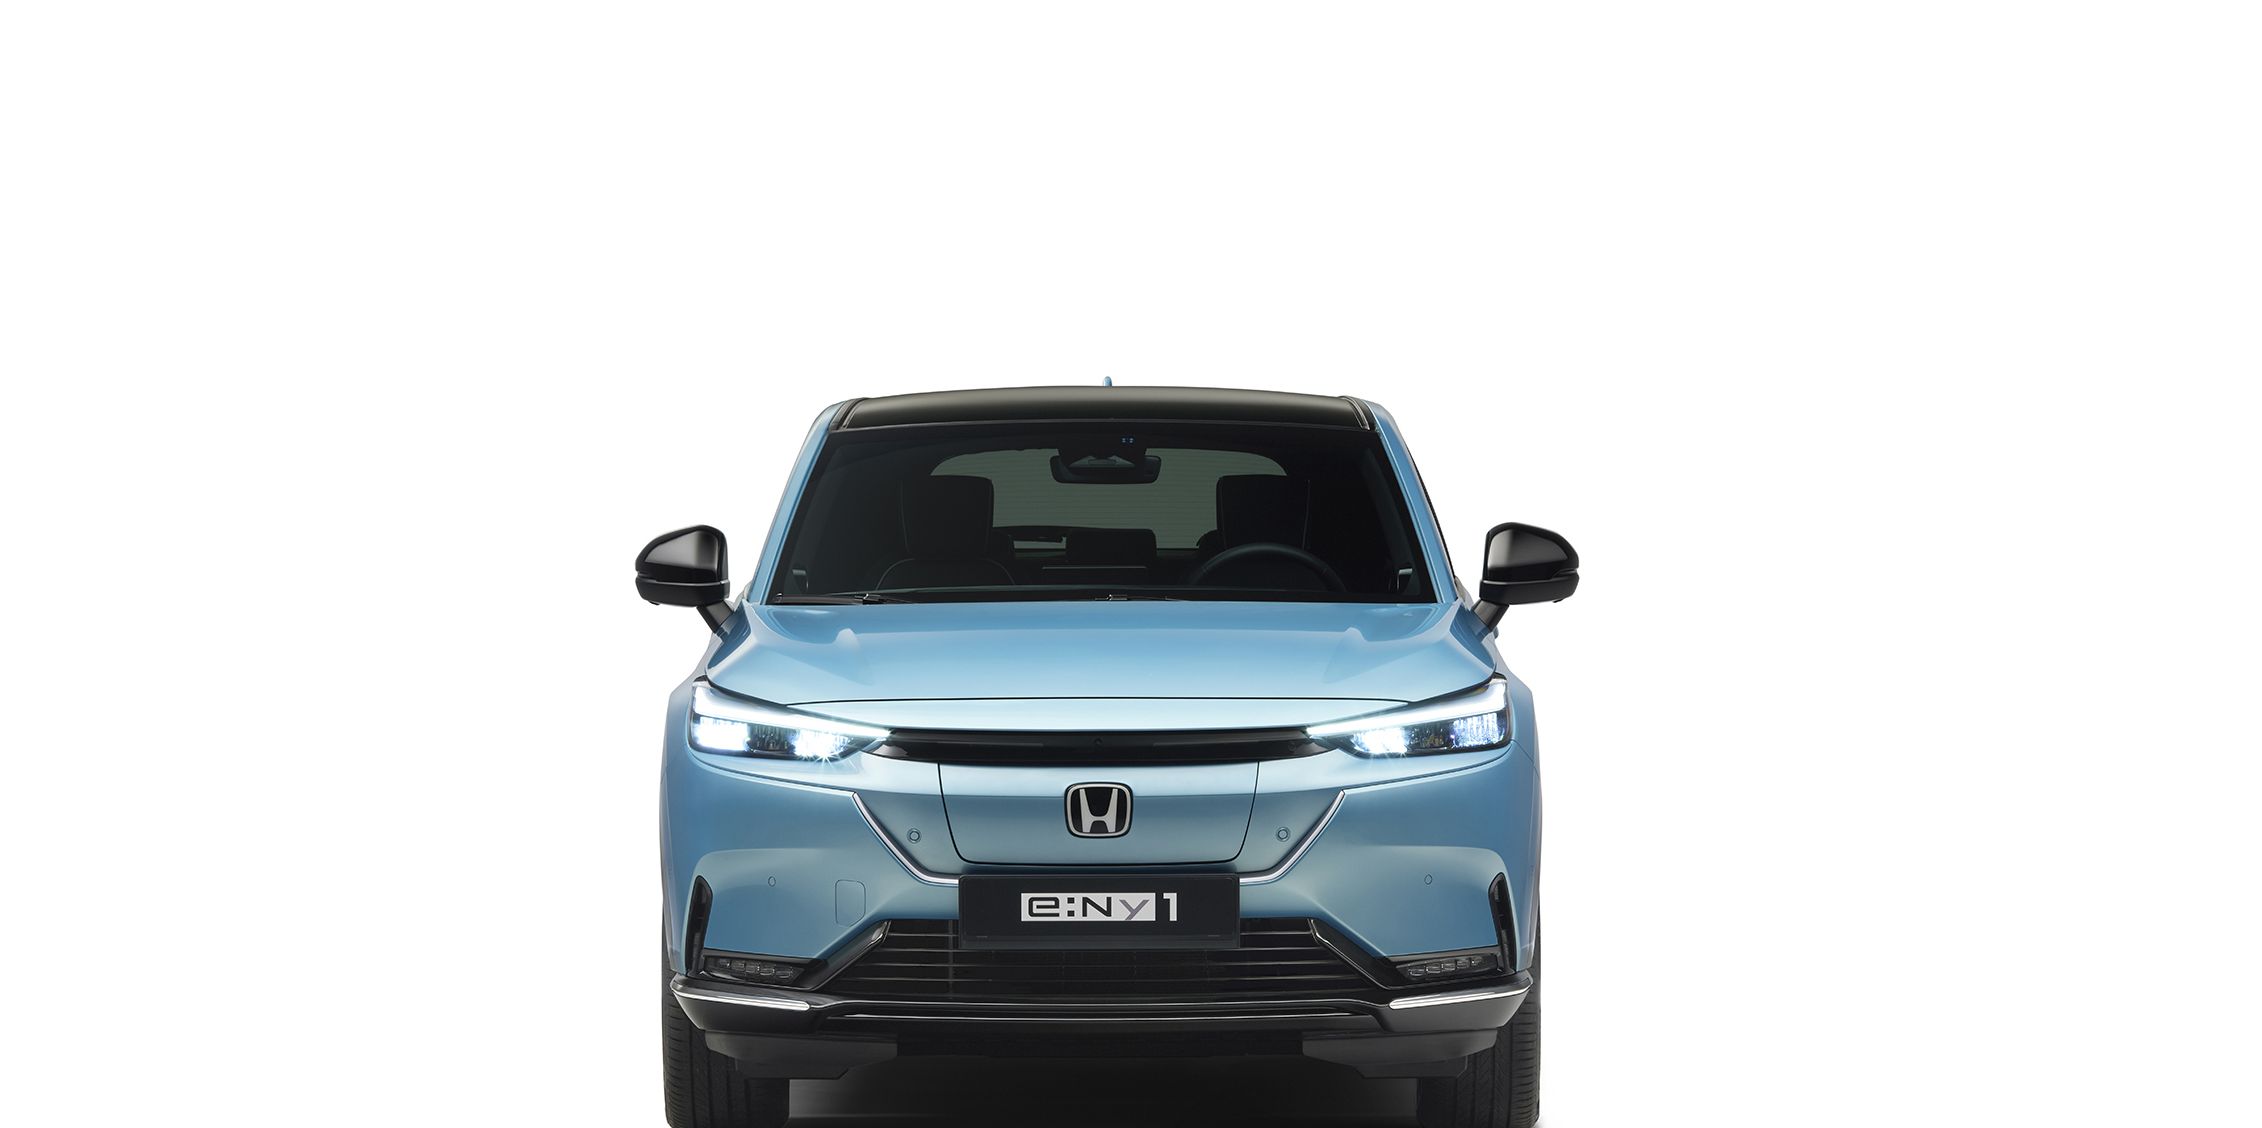 Will the US Ever Get This Honda EV?